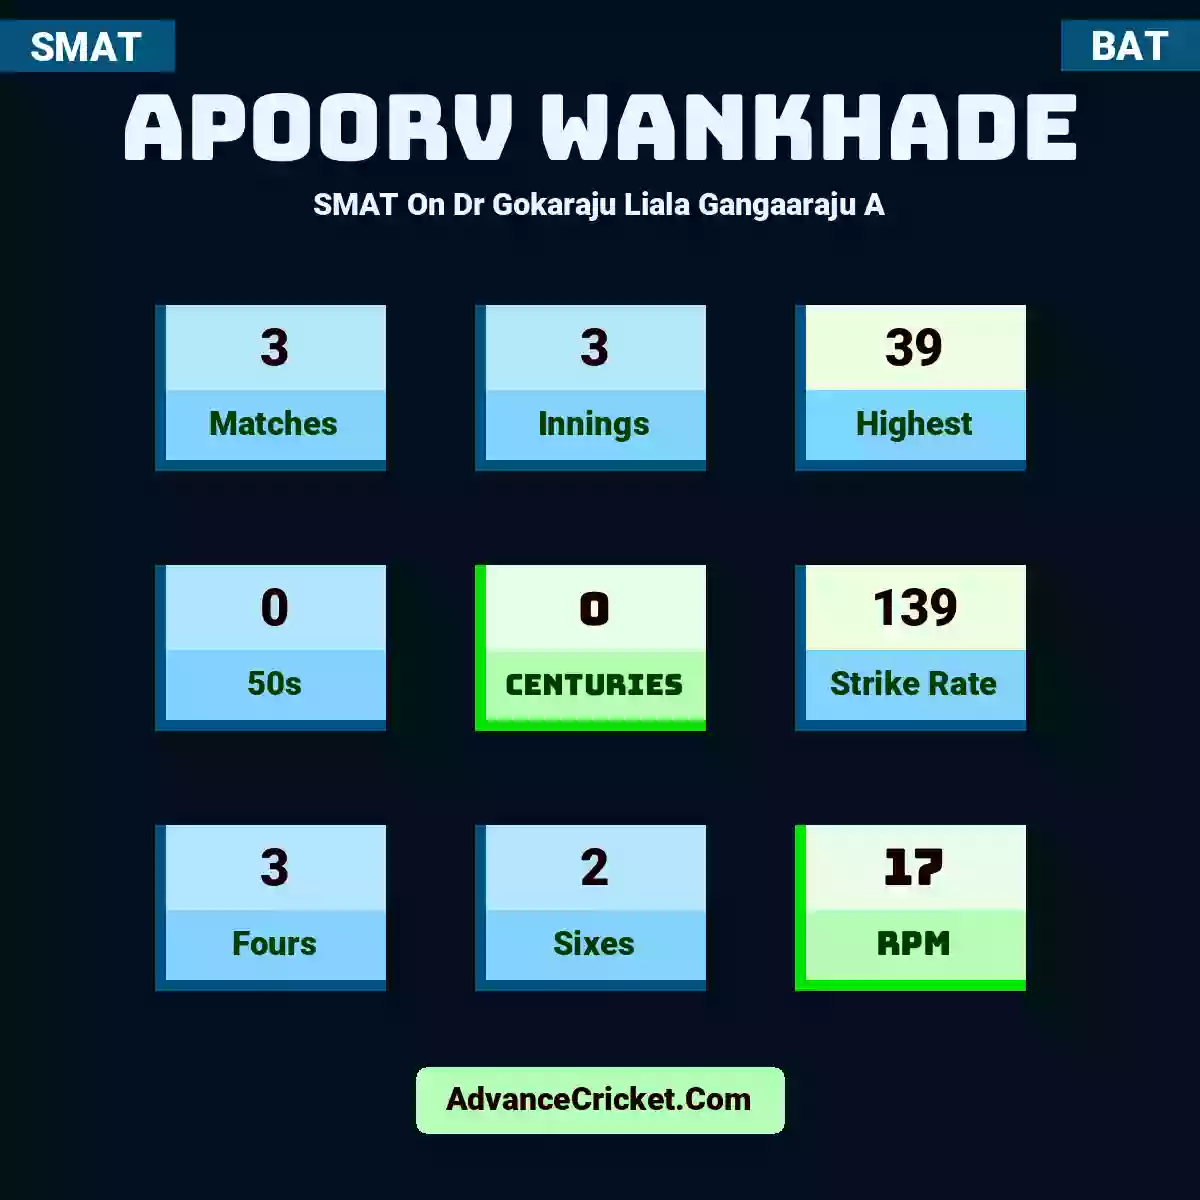 Apoorv Wankhade SMAT  On Dr Gokaraju Liala Gangaaraju A, Apoorv Wankhade played 3 matches, scored 39 runs as highest, 0 half-centuries, and 0 centuries, with a strike rate of 139. A.Wankhade hit 3 fours and 2 sixes, with an RPM of 17.